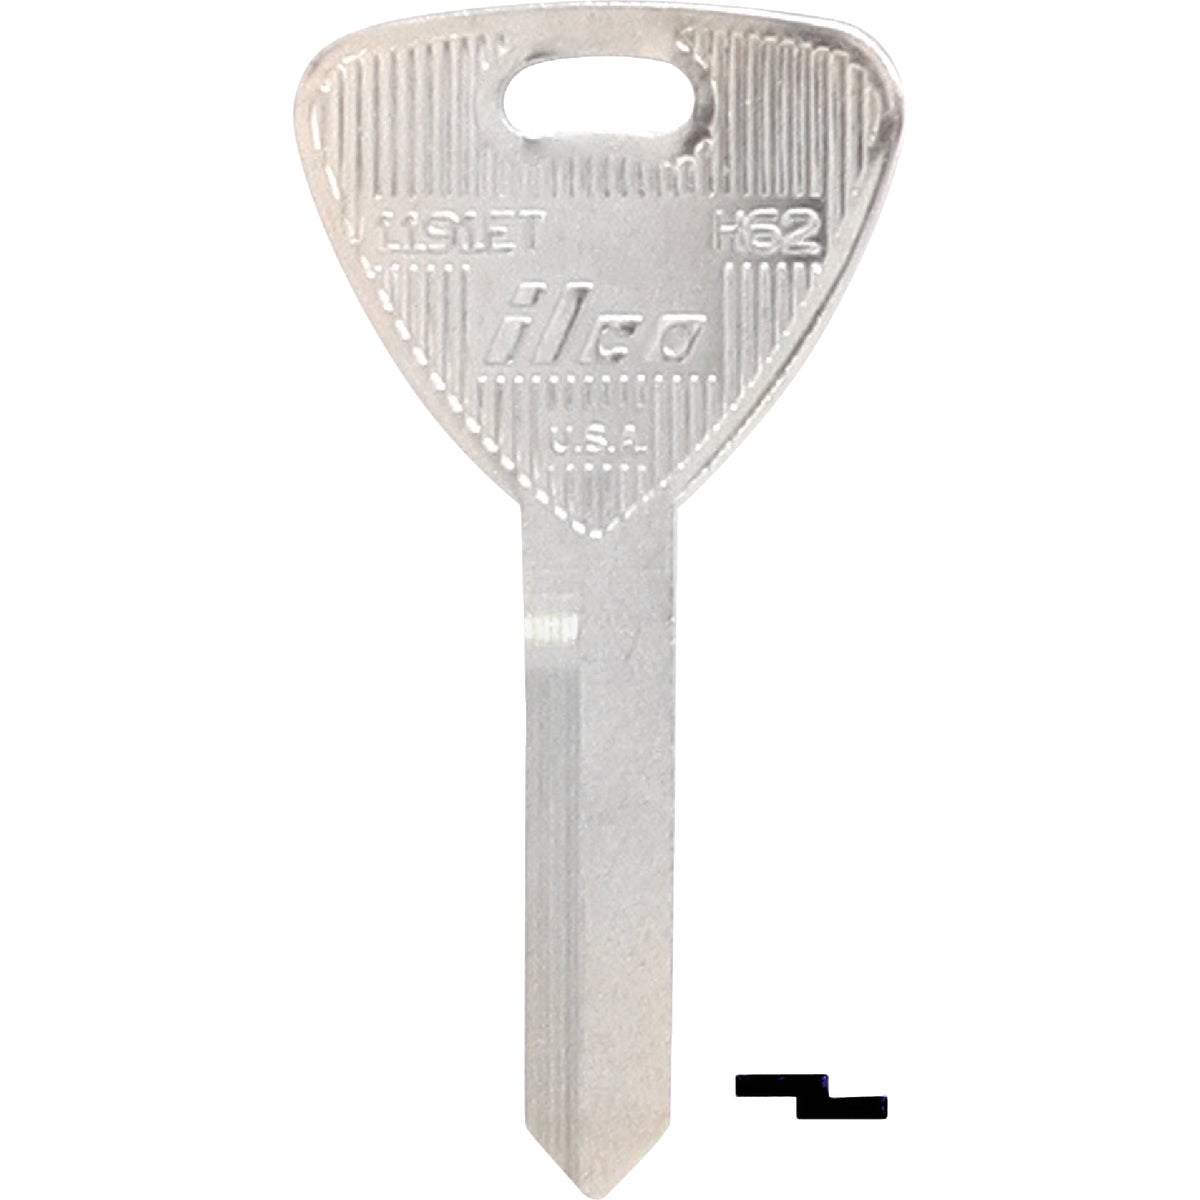 ILCO Ford Nickel Plated Automotive Key, H62 / 1191ET (10-Pack)